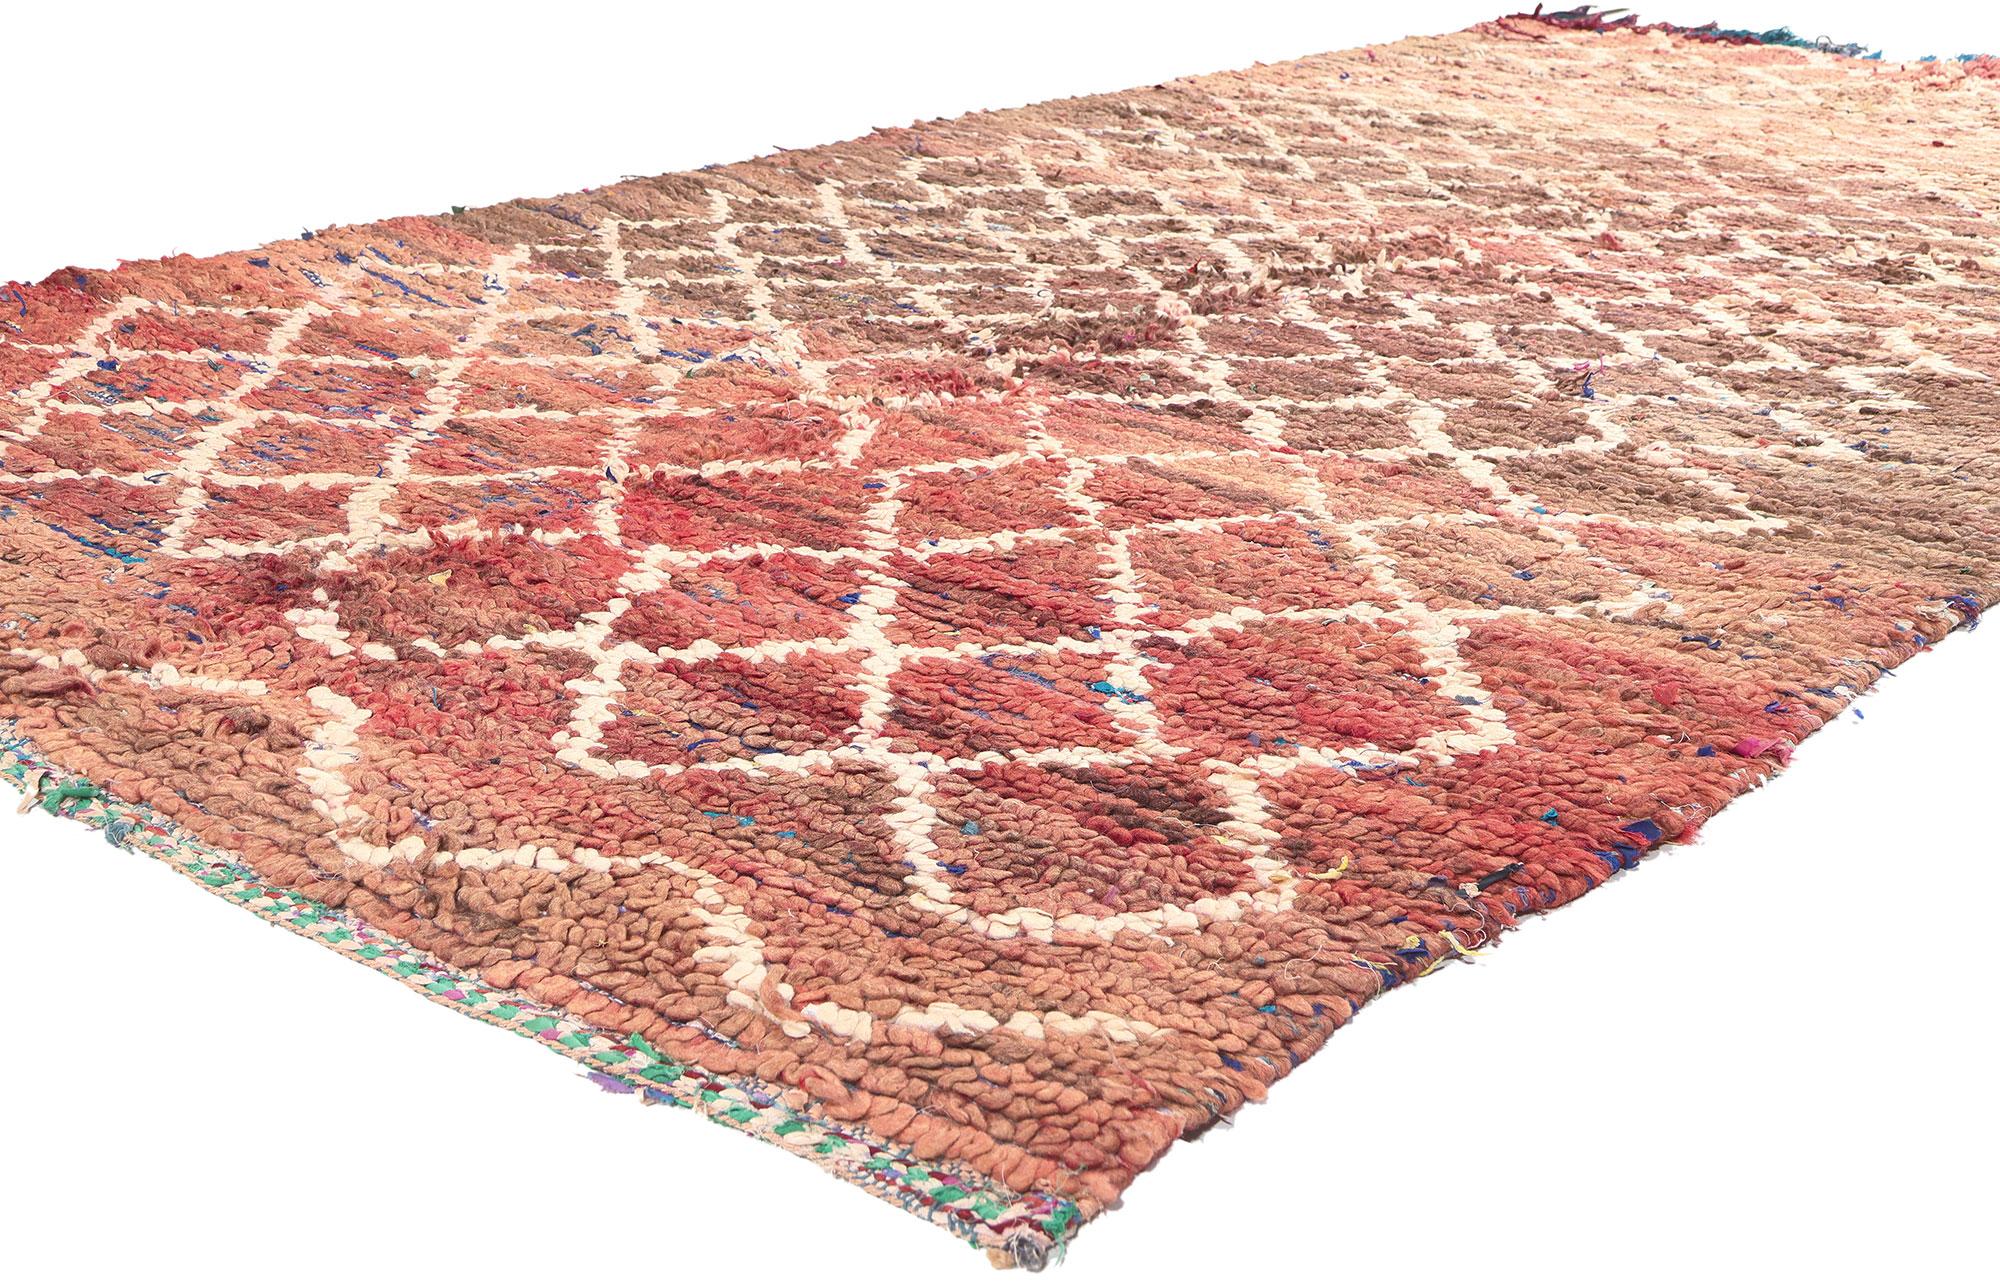 21293 Vintage Boucherouite Moroccan Rag Rug, 05'05 x 10'11.  Embracing the principles of sustainable interior design, this Boucherouite rug, originating from the Atlas Mountains of Morocco, is a testament to the eco-conscious craftsmanship of Berber